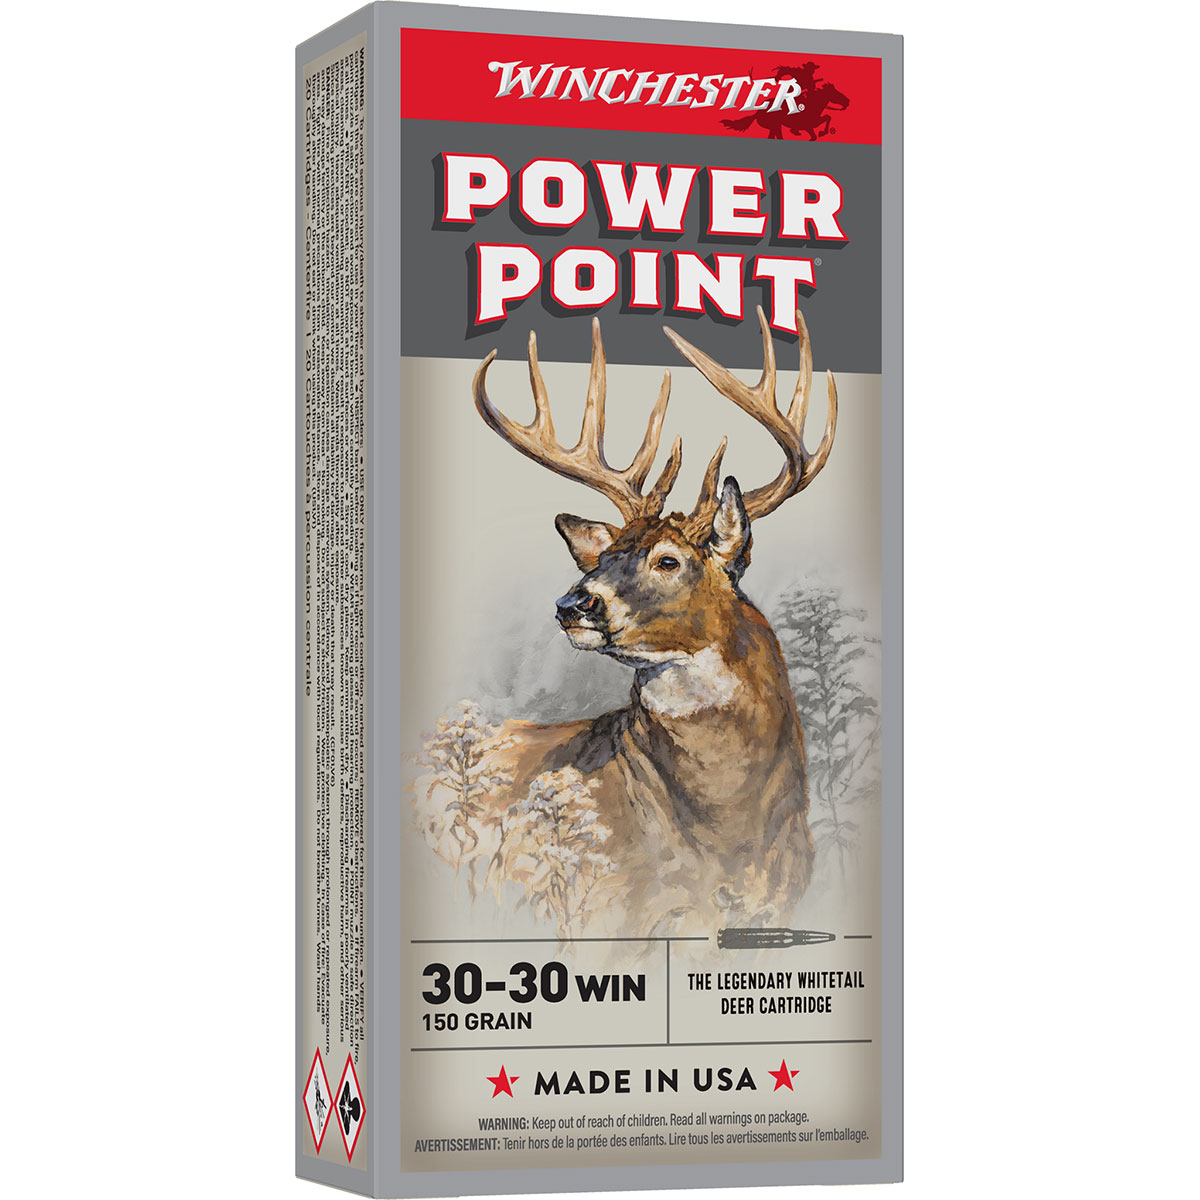 WINCHESTER - POWER POINT 30-30 WINCHESTER RIFLE AMMO